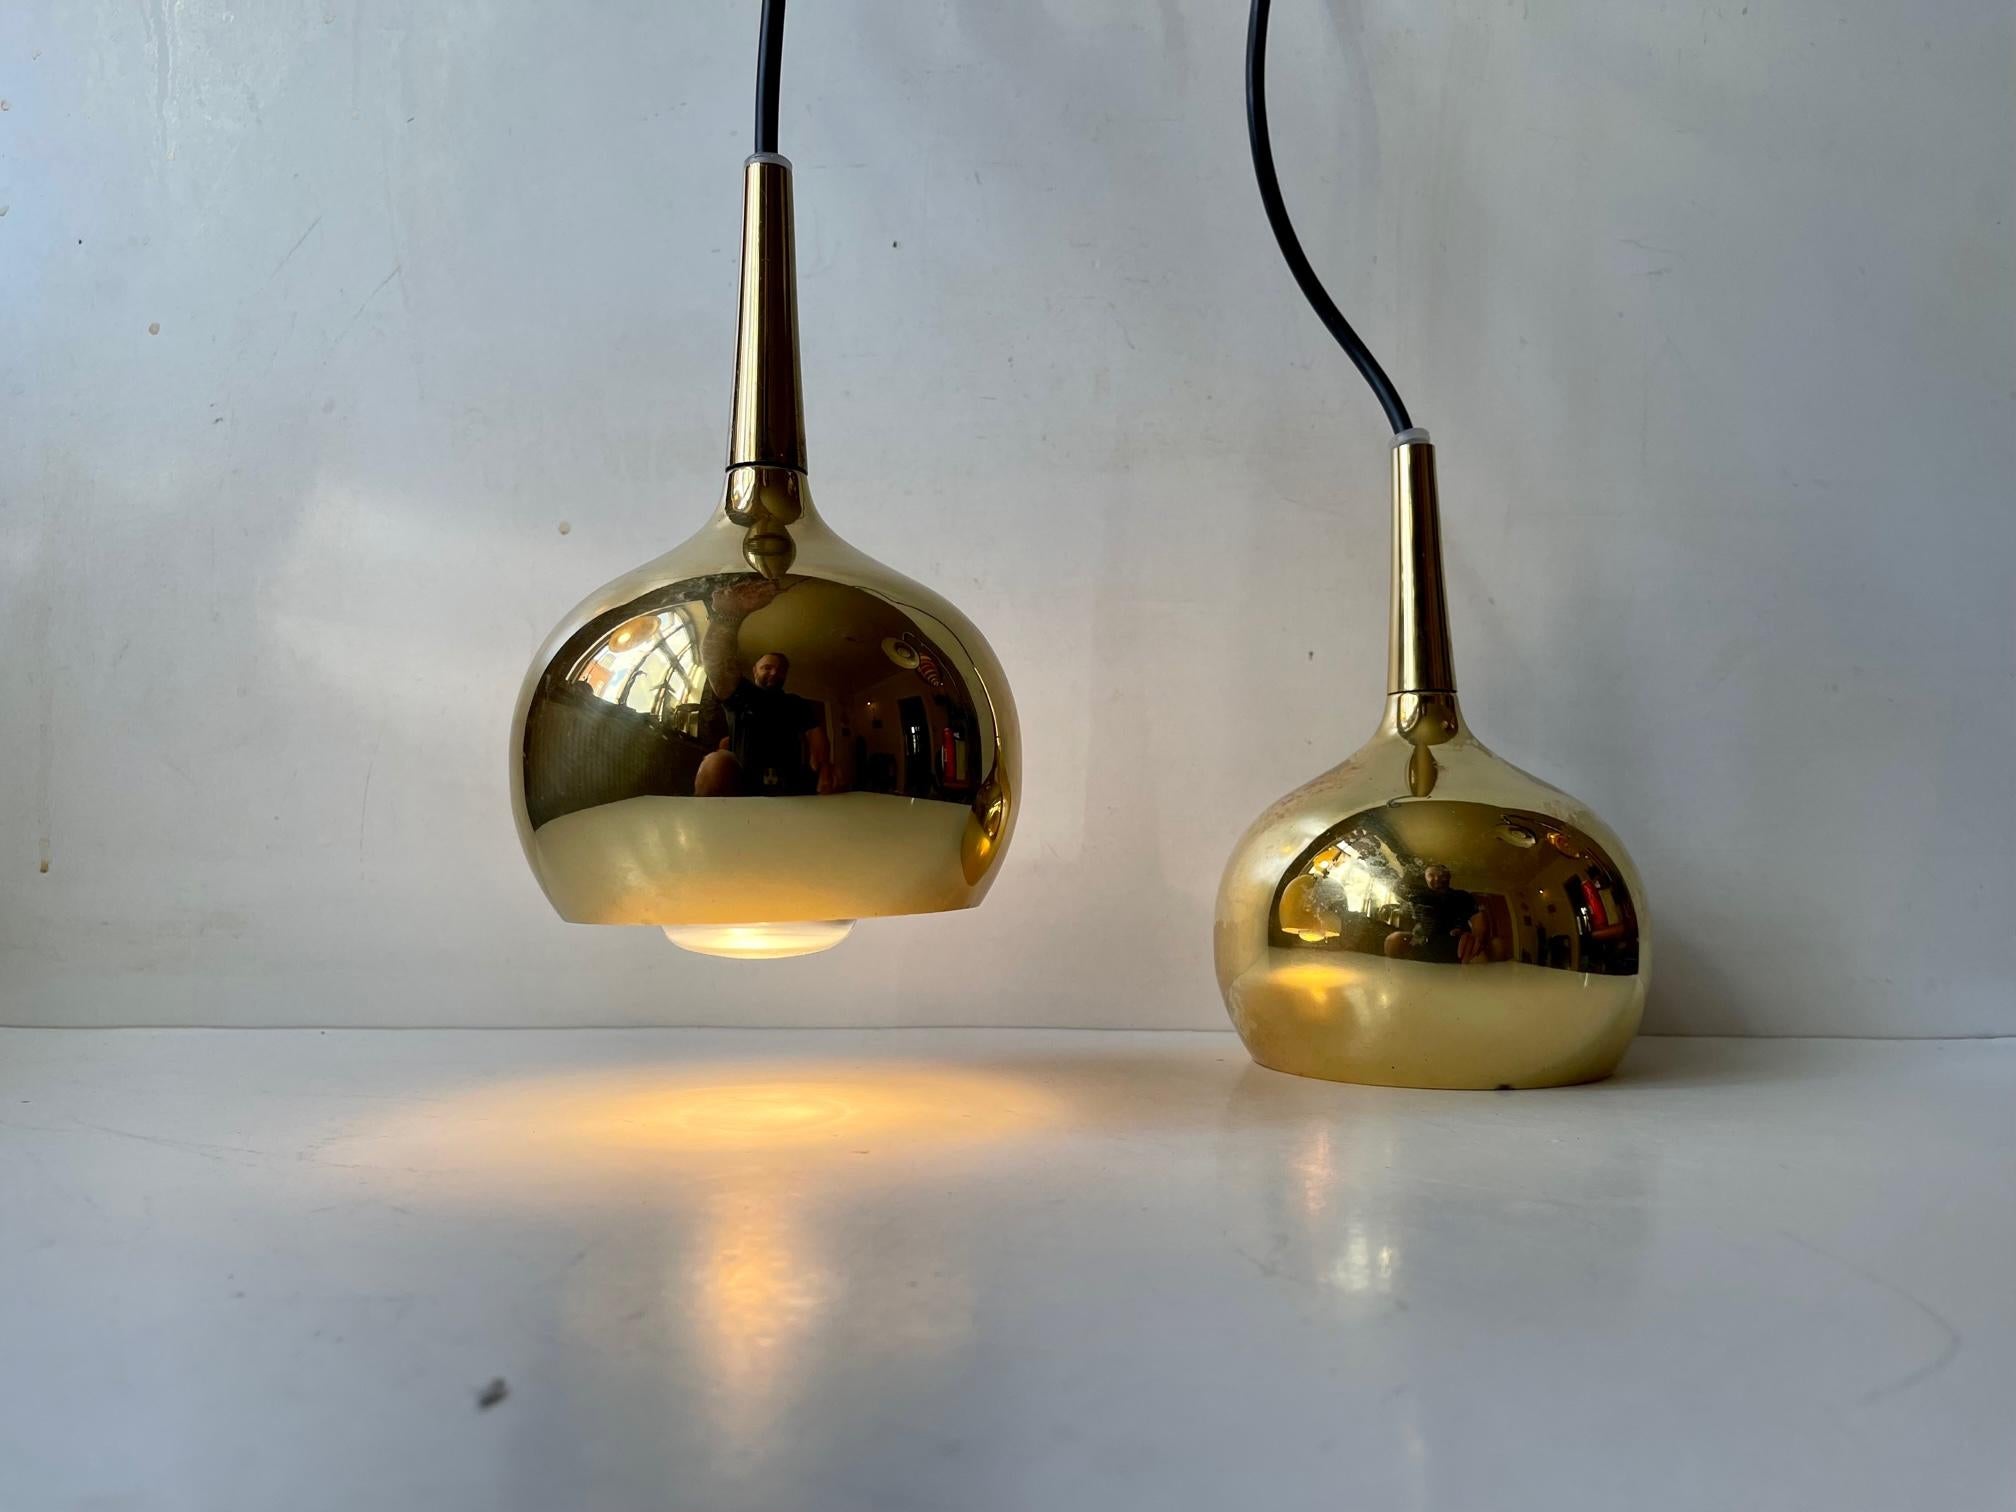 A pair of small onion shaped pendant ceiling lights designed by Hans-Agne Jakobsson for Markaryd in Sweden during the 1960s. They feature a solid brass top/tube and a gold-chrome main shade with white reflective interior. Suitable for kitchen, cosy